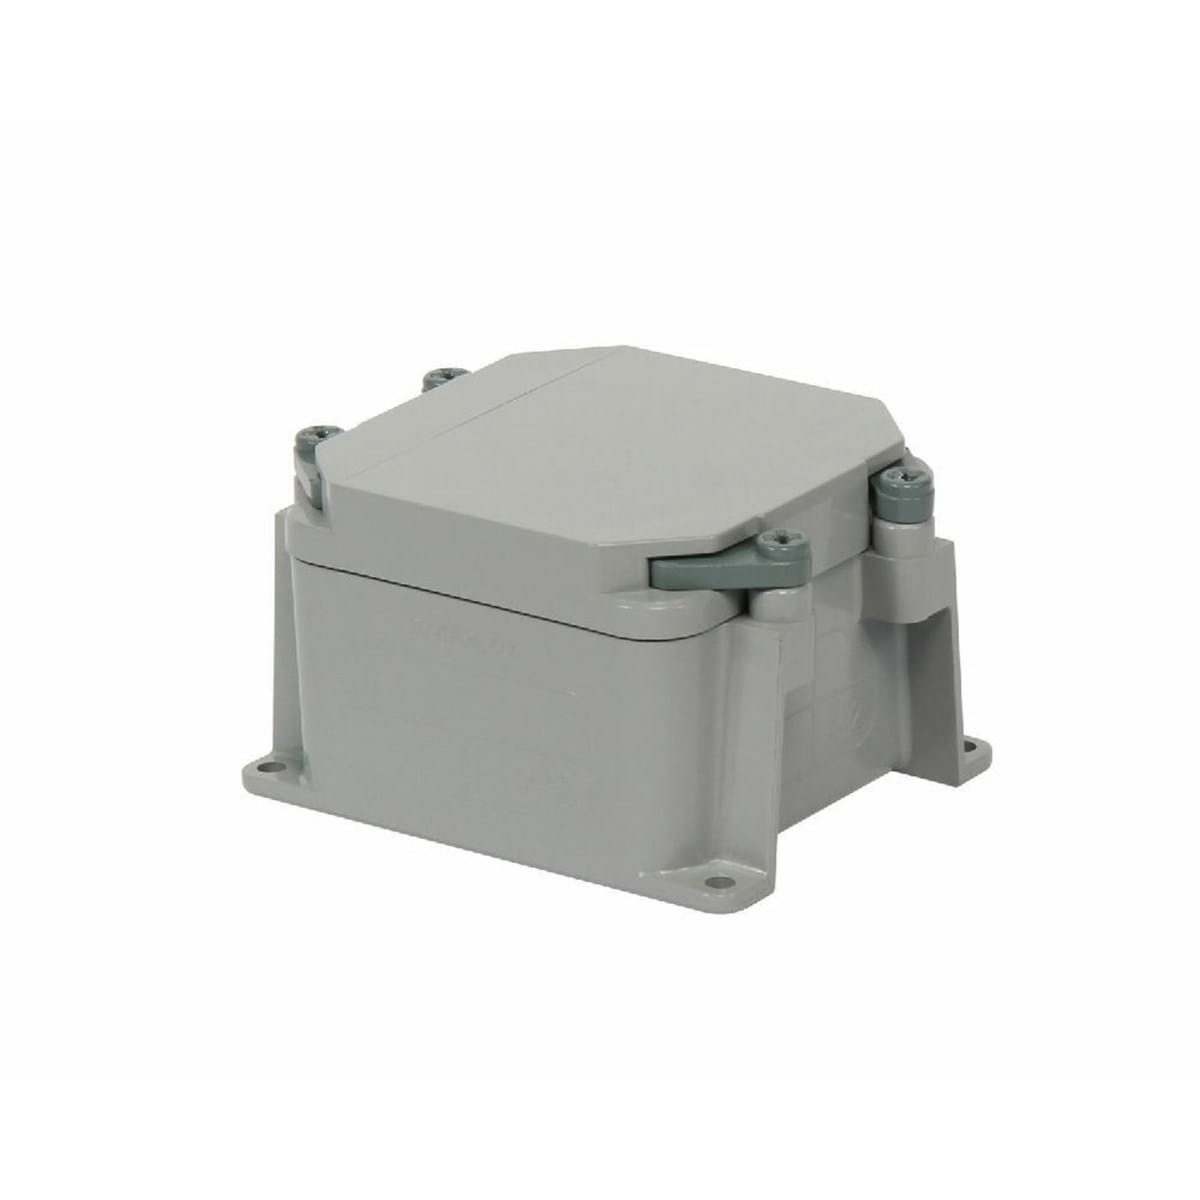 PVC JUNCTION BOX  4x4x2  JB442 078242 OLD STYLE NO QUICK LATCHES